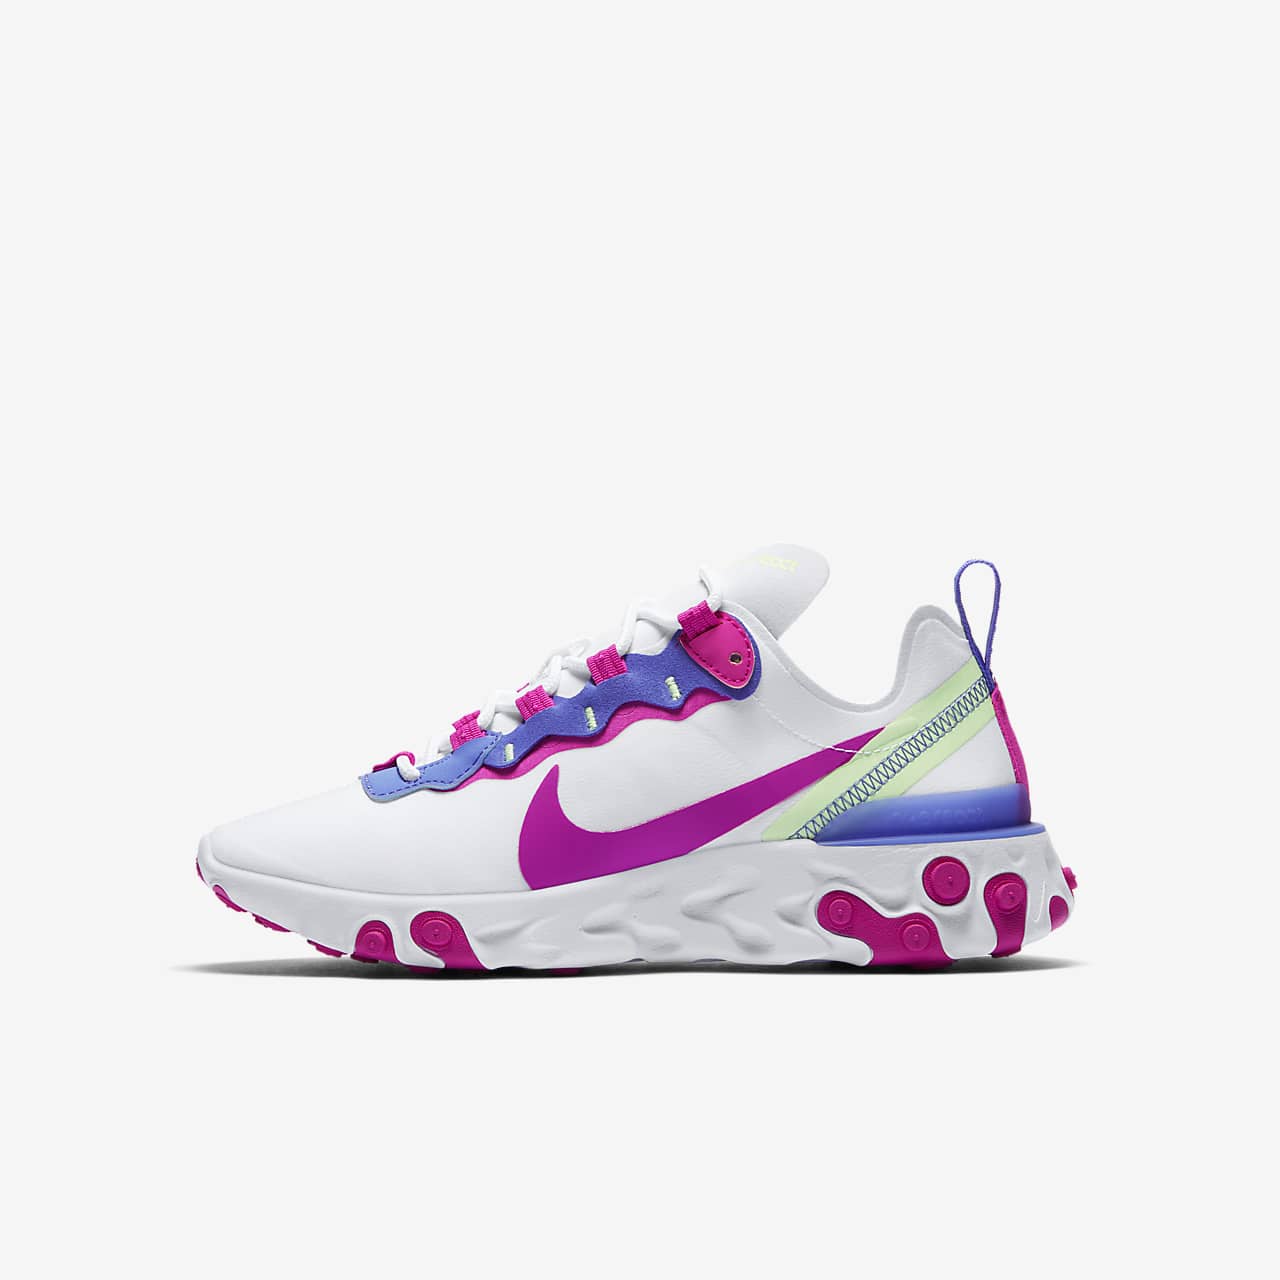 nike react element 55 by you